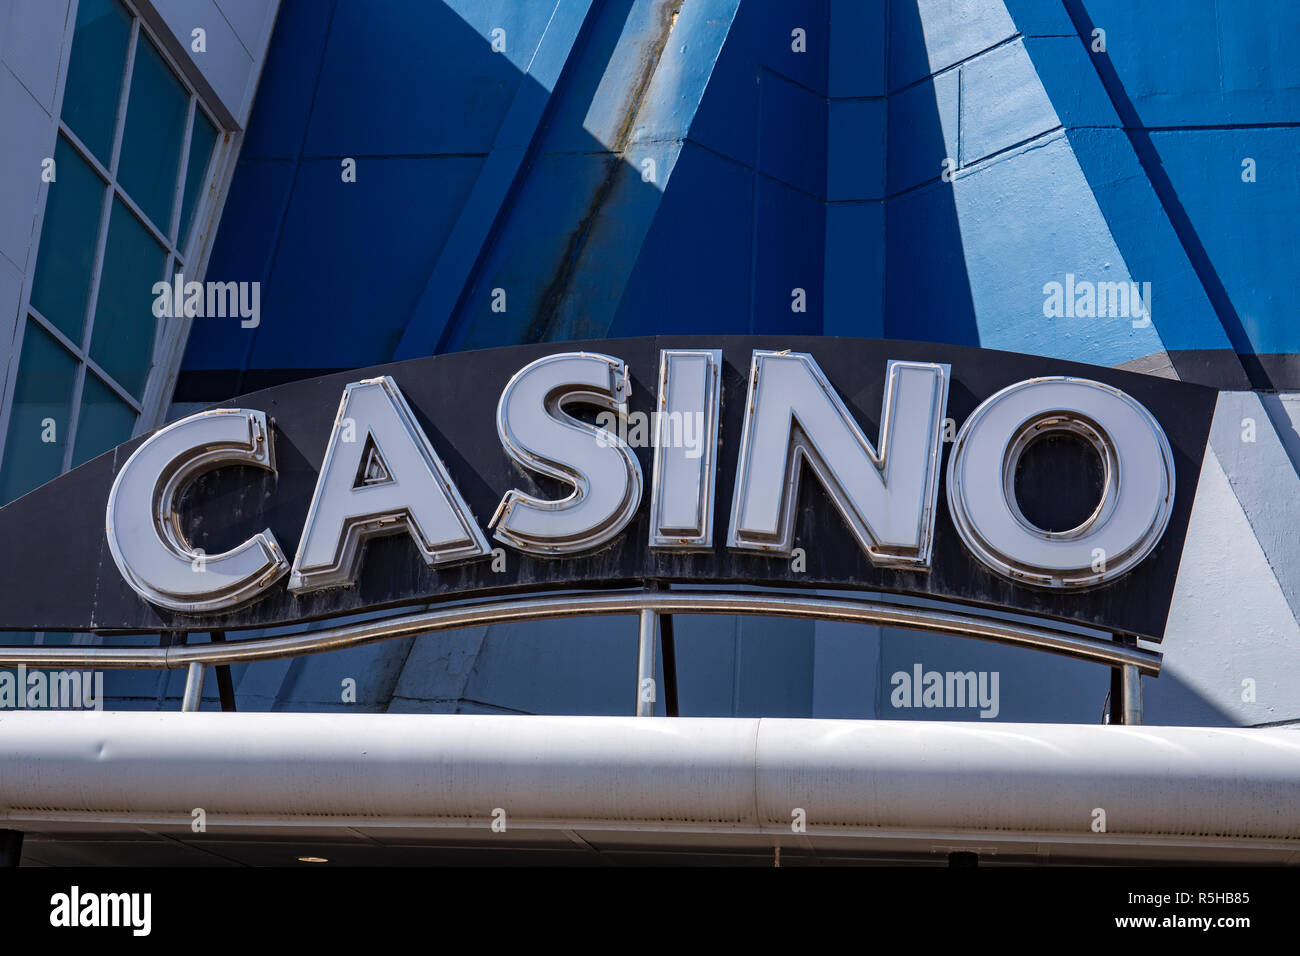 Casino sign on outside wall Stock Photo